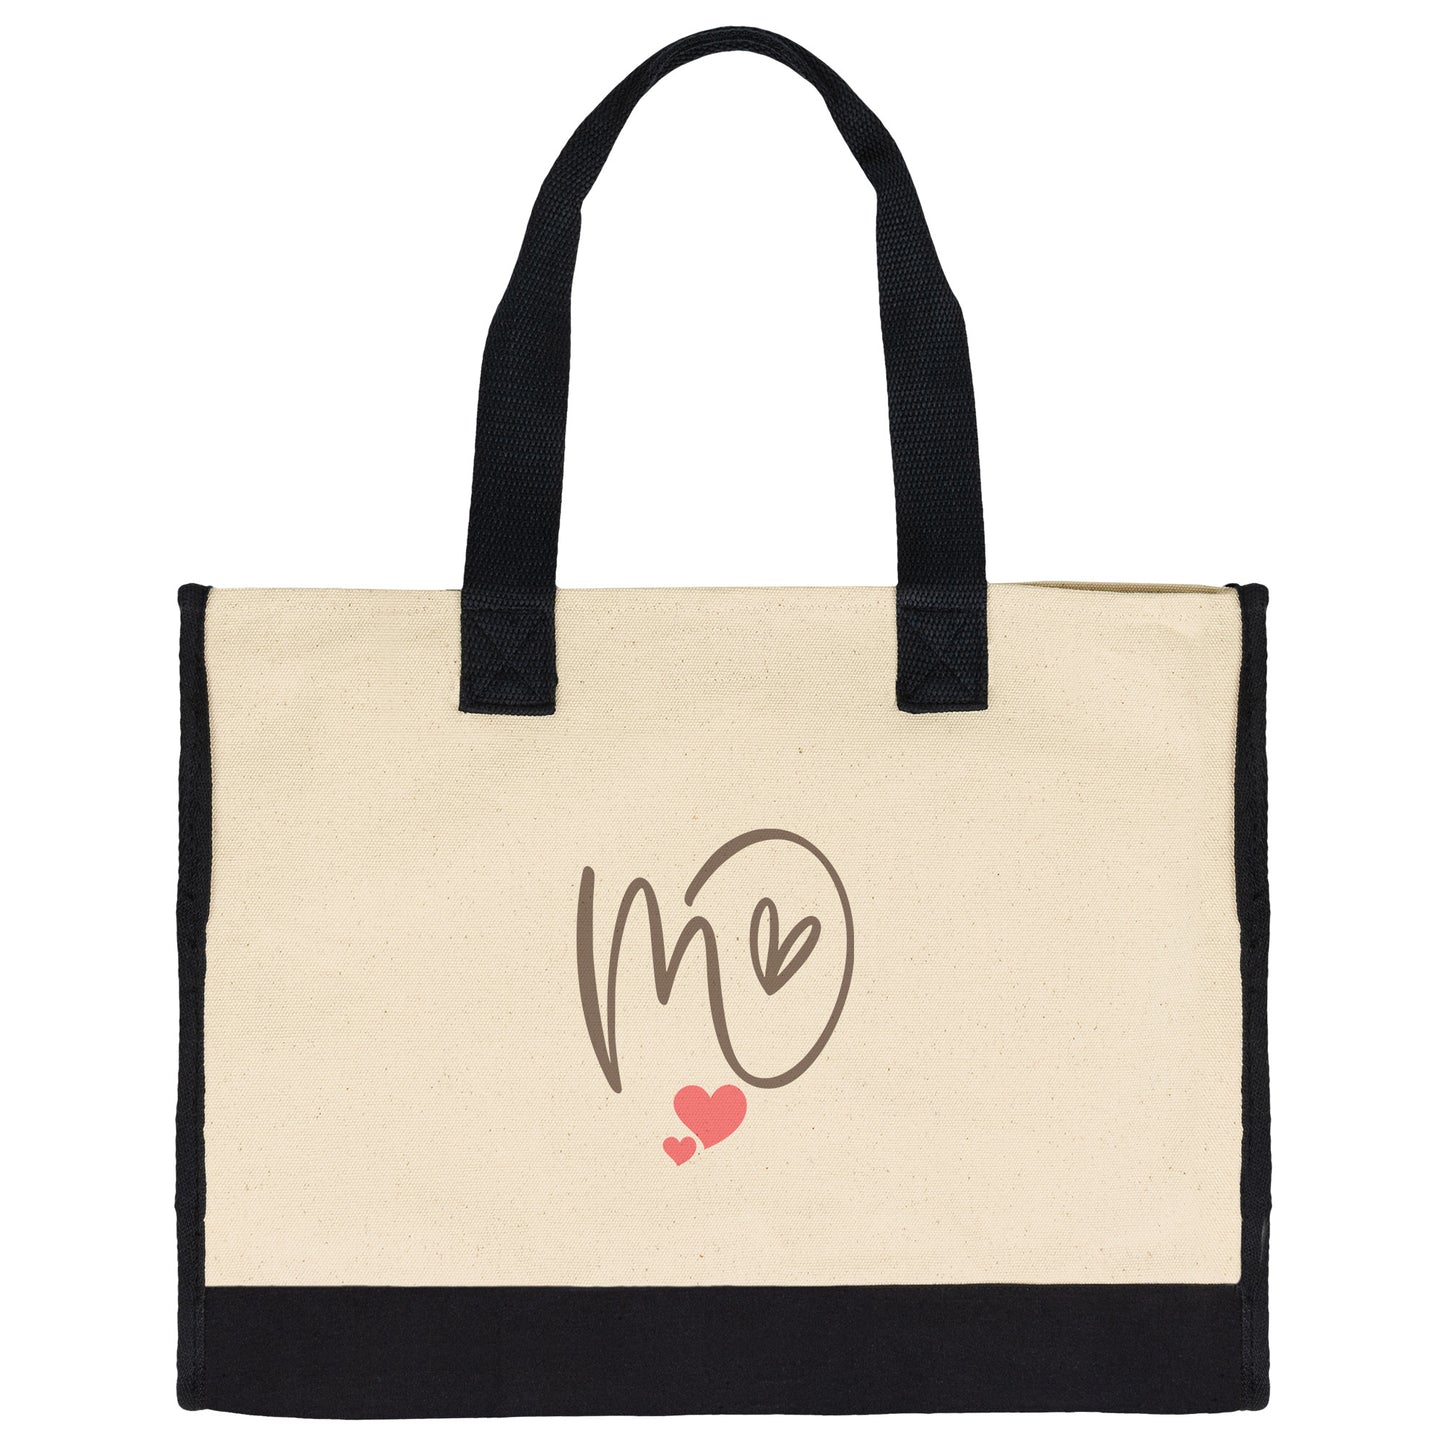 Personalised Tote Bag with Initials, Women's Bag